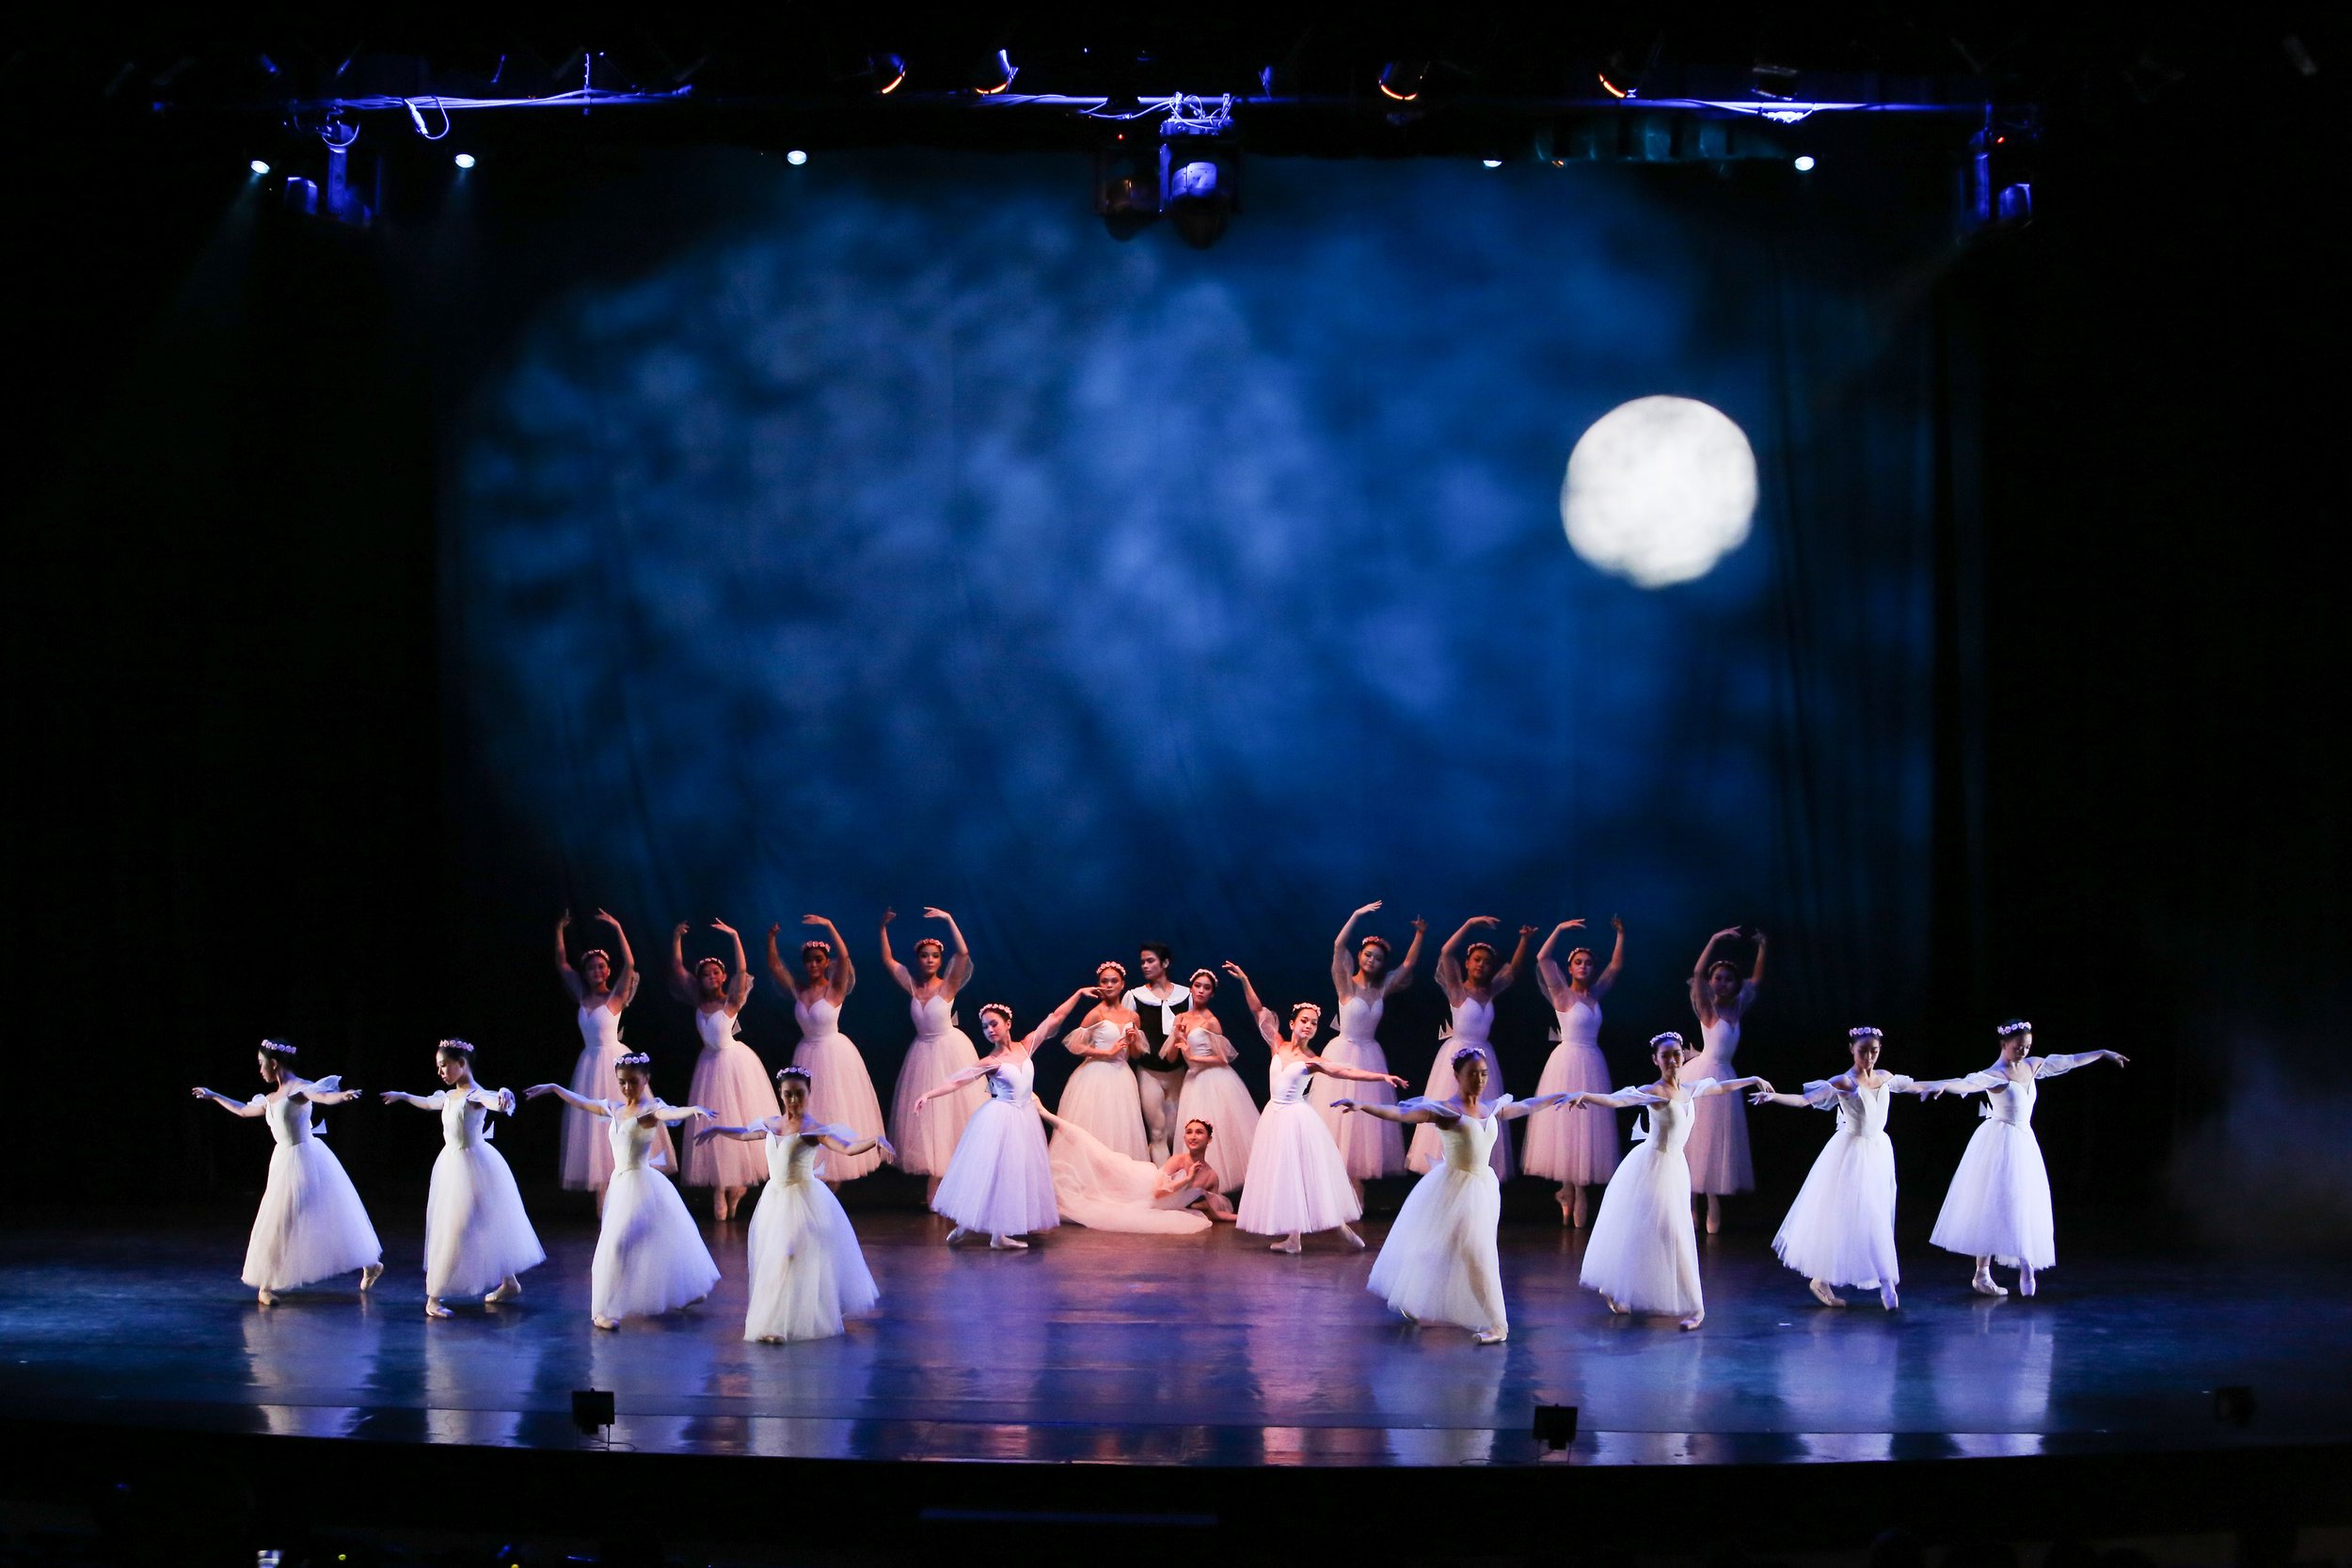   Les Sylphides  (also known as  Chopiniana ) rightfully earns its moniker as a “white ballet” as the entire cast sticks to one color – with the exception of the sole male dancer who wears a vest over his white outfit. In 2019 as part of its double-b